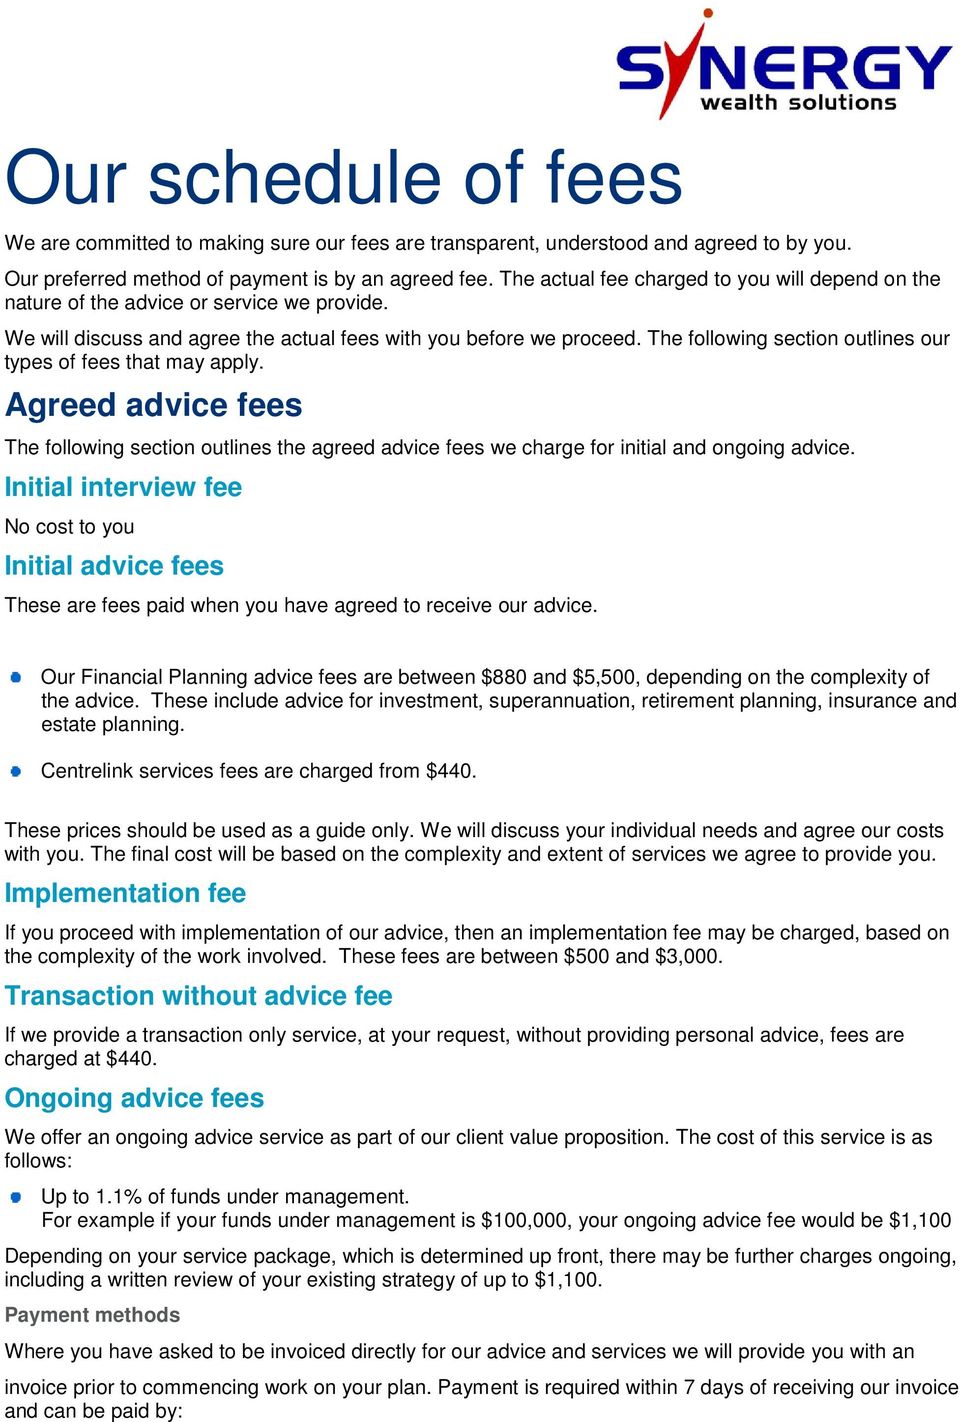 The following section outlines our types of fees that may apply. Agreed advice fees The following section outlines the agreed advice fees we charge for initial and ongoing advice.